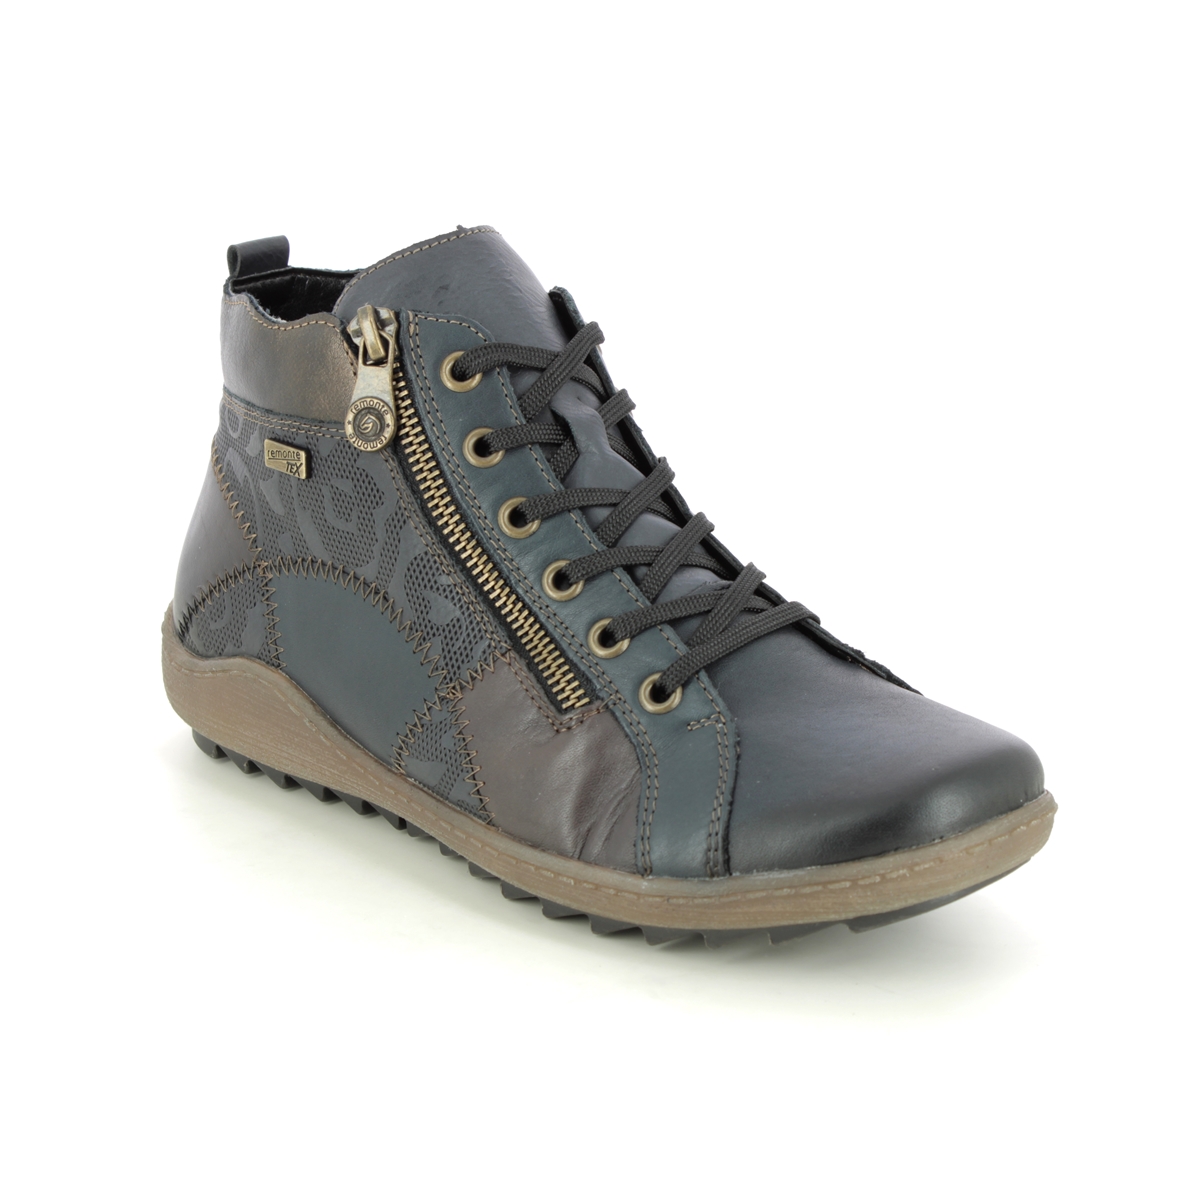 Remonte Zigseipatch Tex Navy Leather Womens Hi Tops R1467-14 In Size 37 In Plain Navy Leather